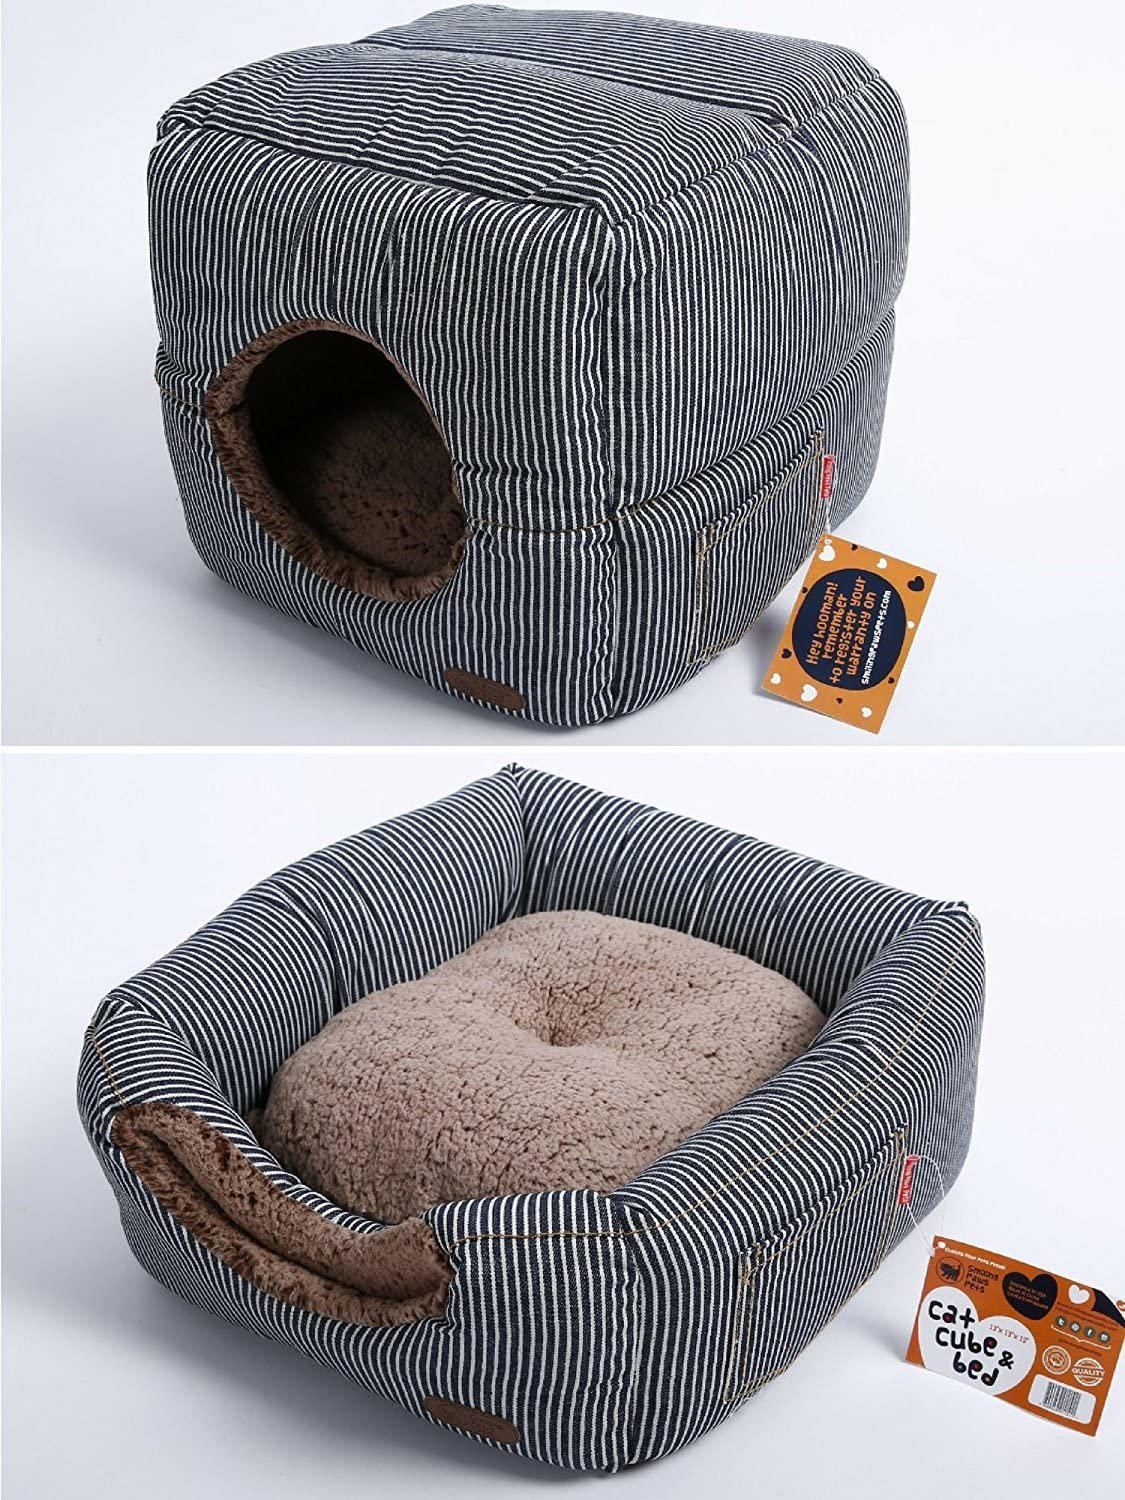 Smiling Paws Cat House for Indoor Cats - Quality Washable Small Pet Bed That Serves as a Cat Cave, Cat Condo, or a Popup Cat Tent - a 2 in 1 Covered Cat Bed Cave & Cat Cube for Indoor Cats